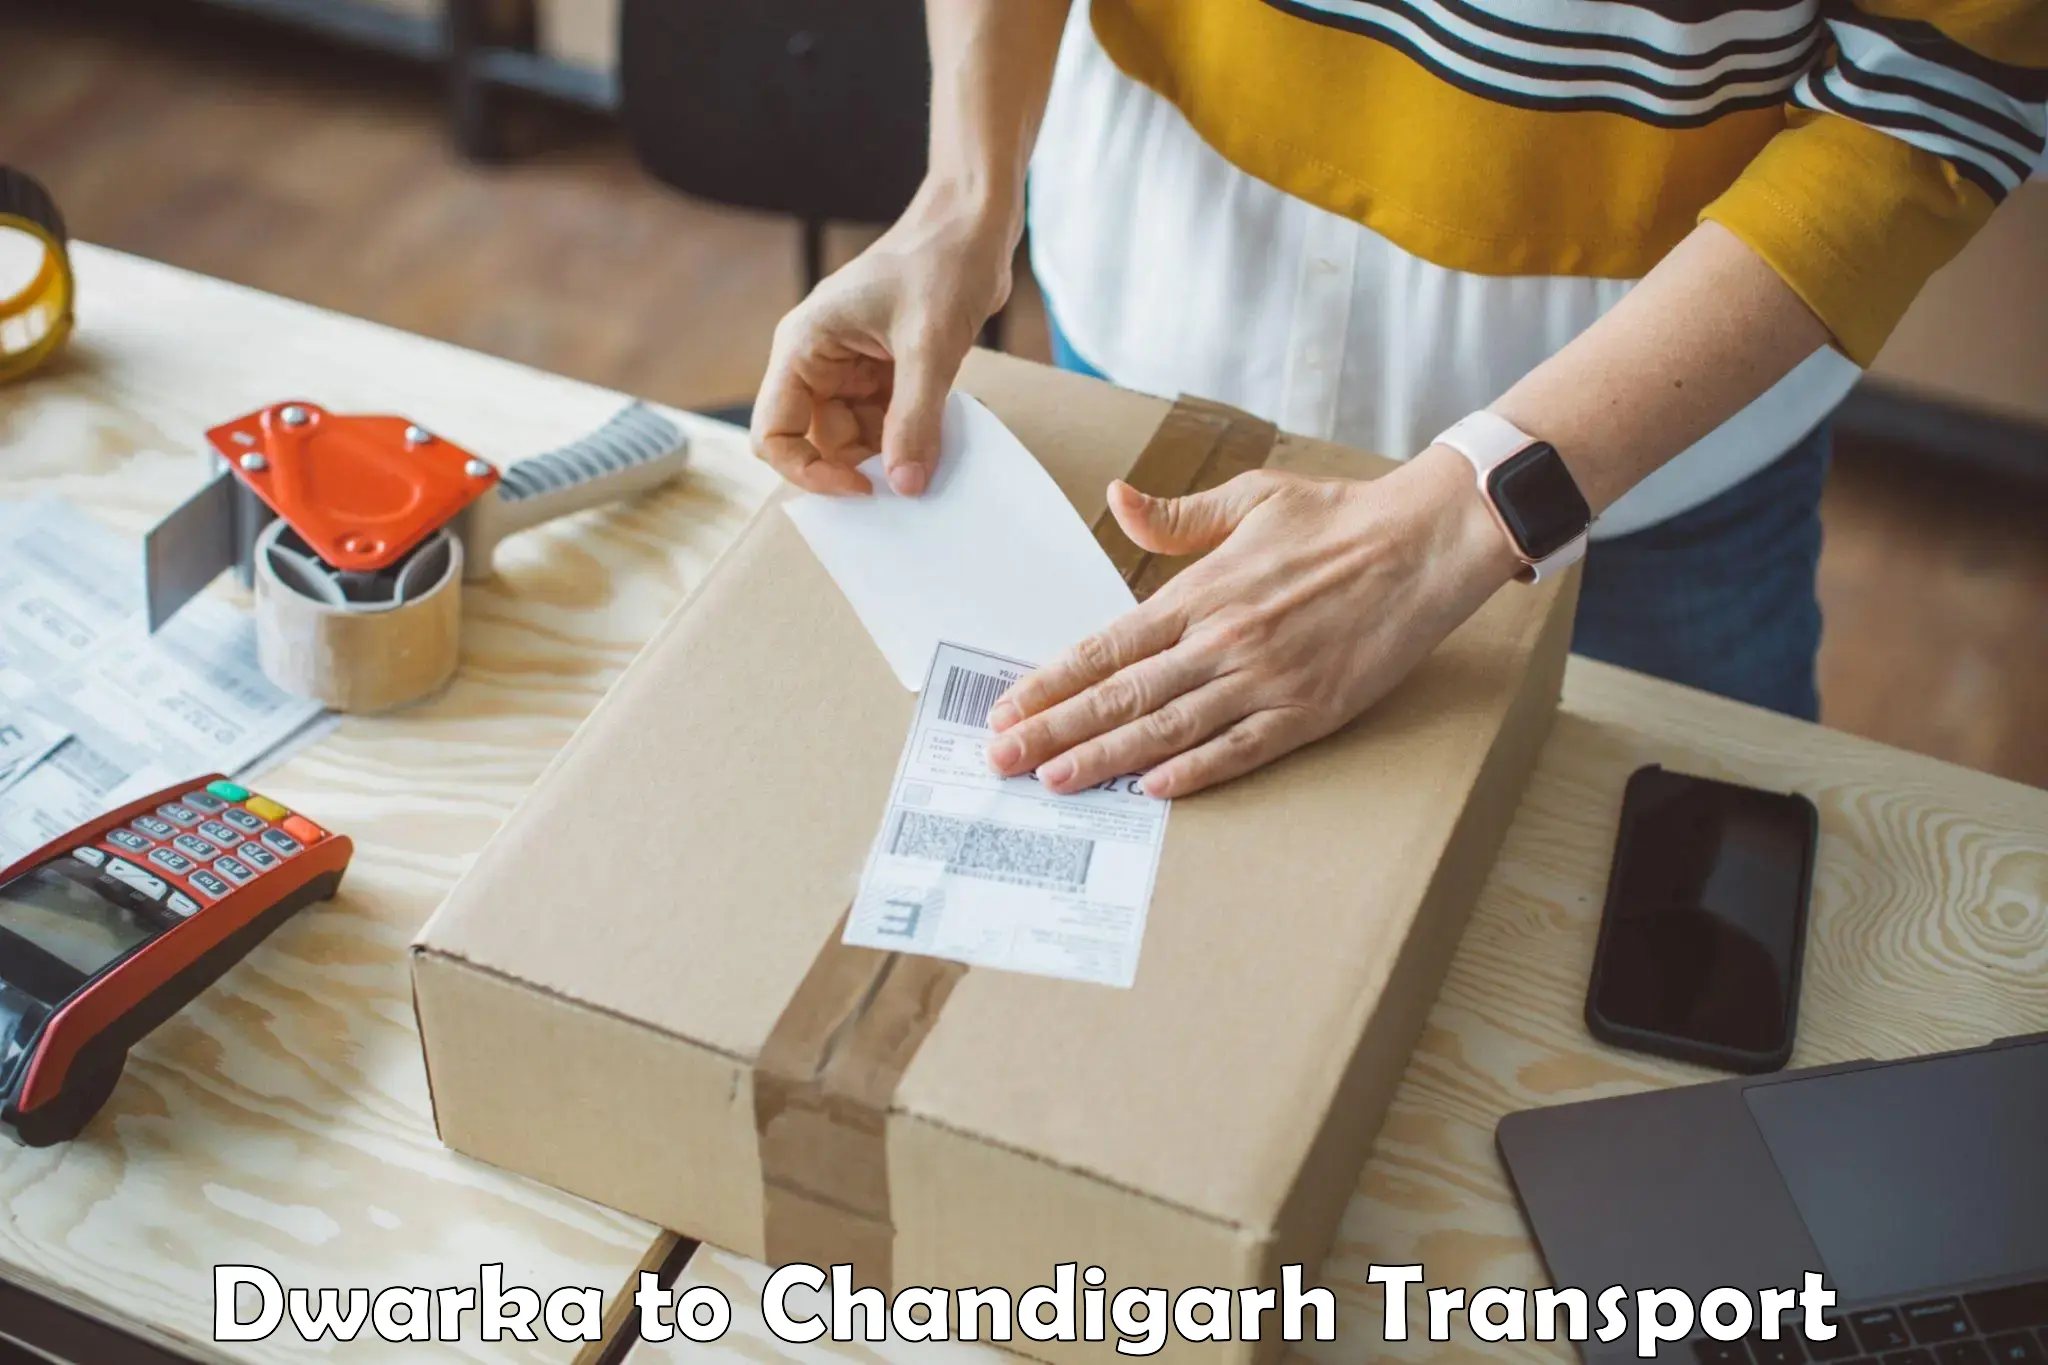 Truck transport companies in India Dwarka to Chandigarh